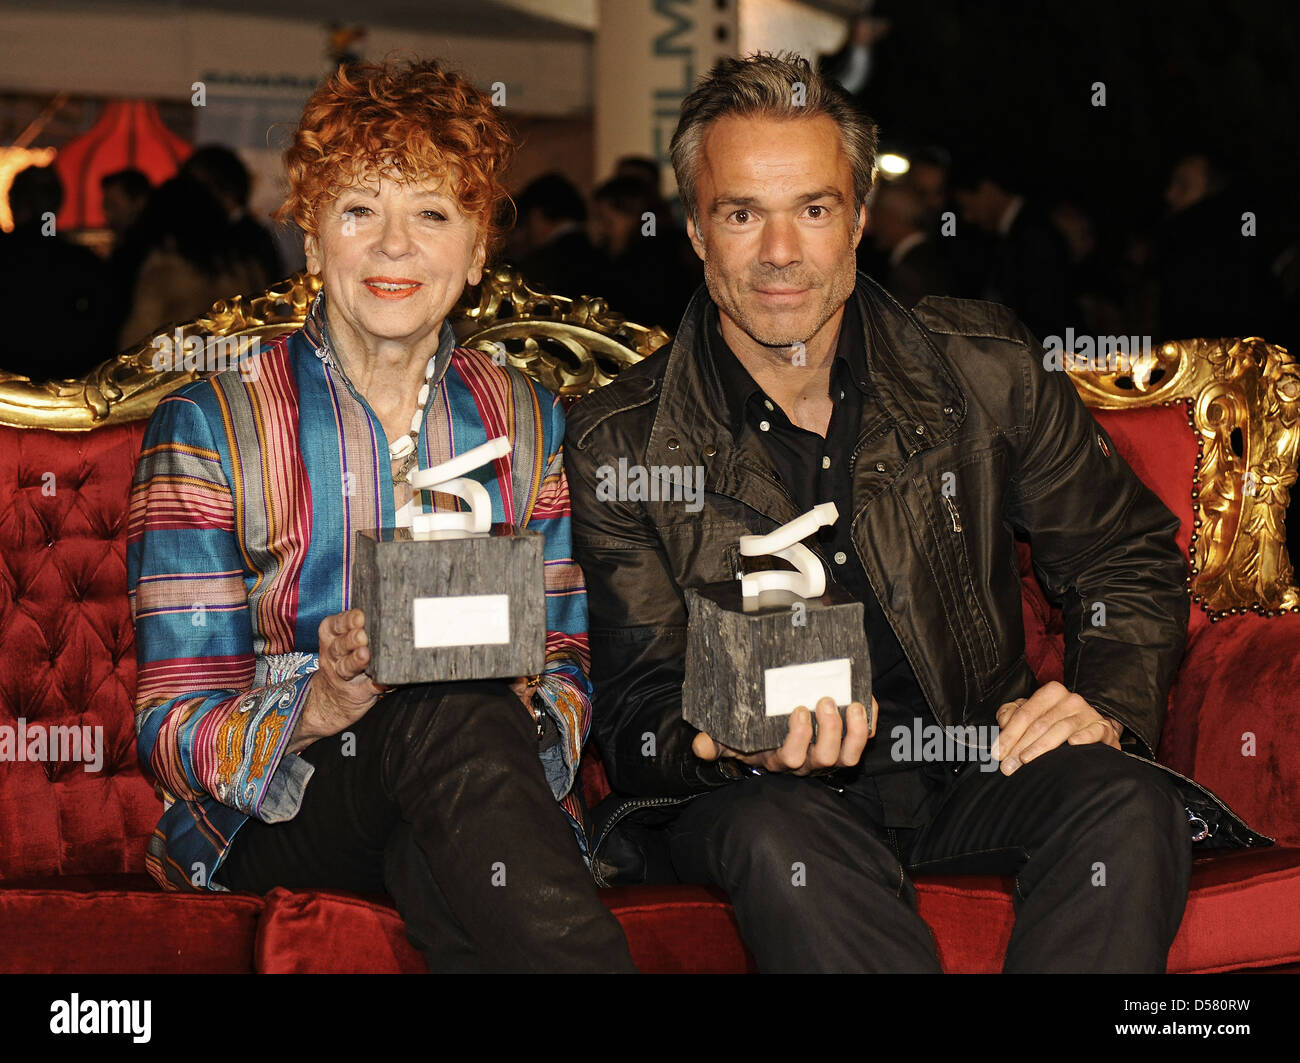 Herlinde Koelbl and Hannes Jaenicke at the Querdenker Awards 2011 at Bavaria studios. Munich, Germany - 29.11.2011 Stock Photo